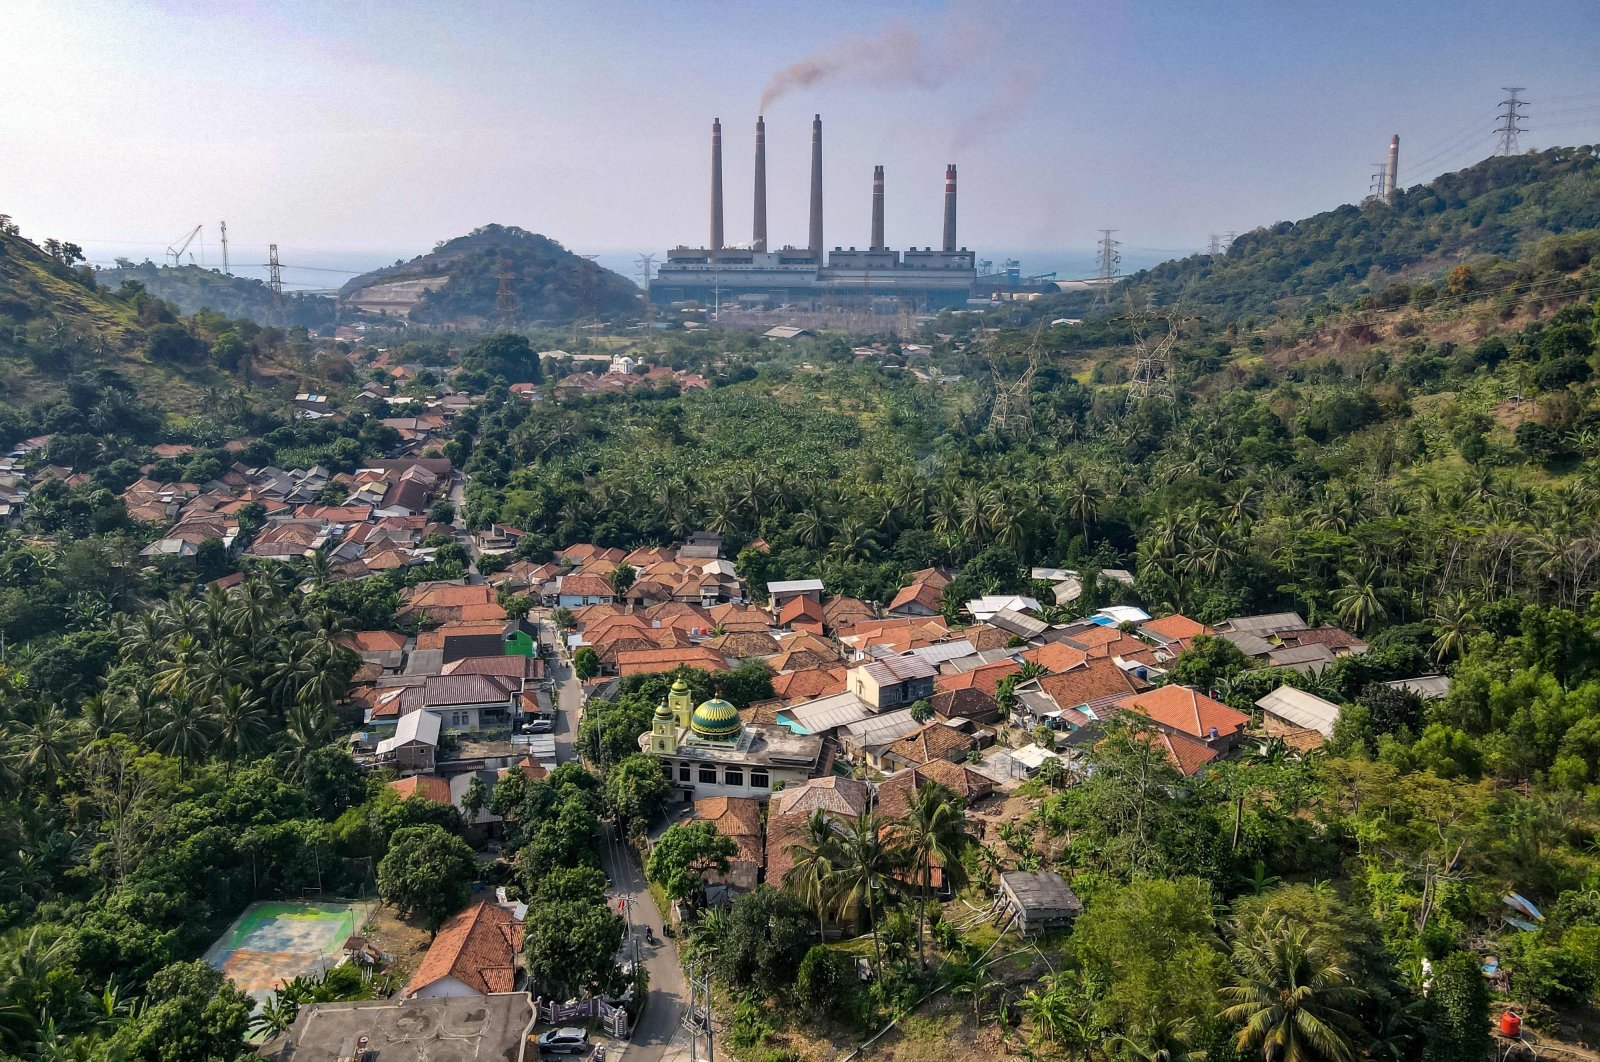 Village houses can be seen as smoke rises from the chimneys at the Suralaya coal power plant in Cilegon, Indonesia, Sept. 21, 2021. (AFP Photo)